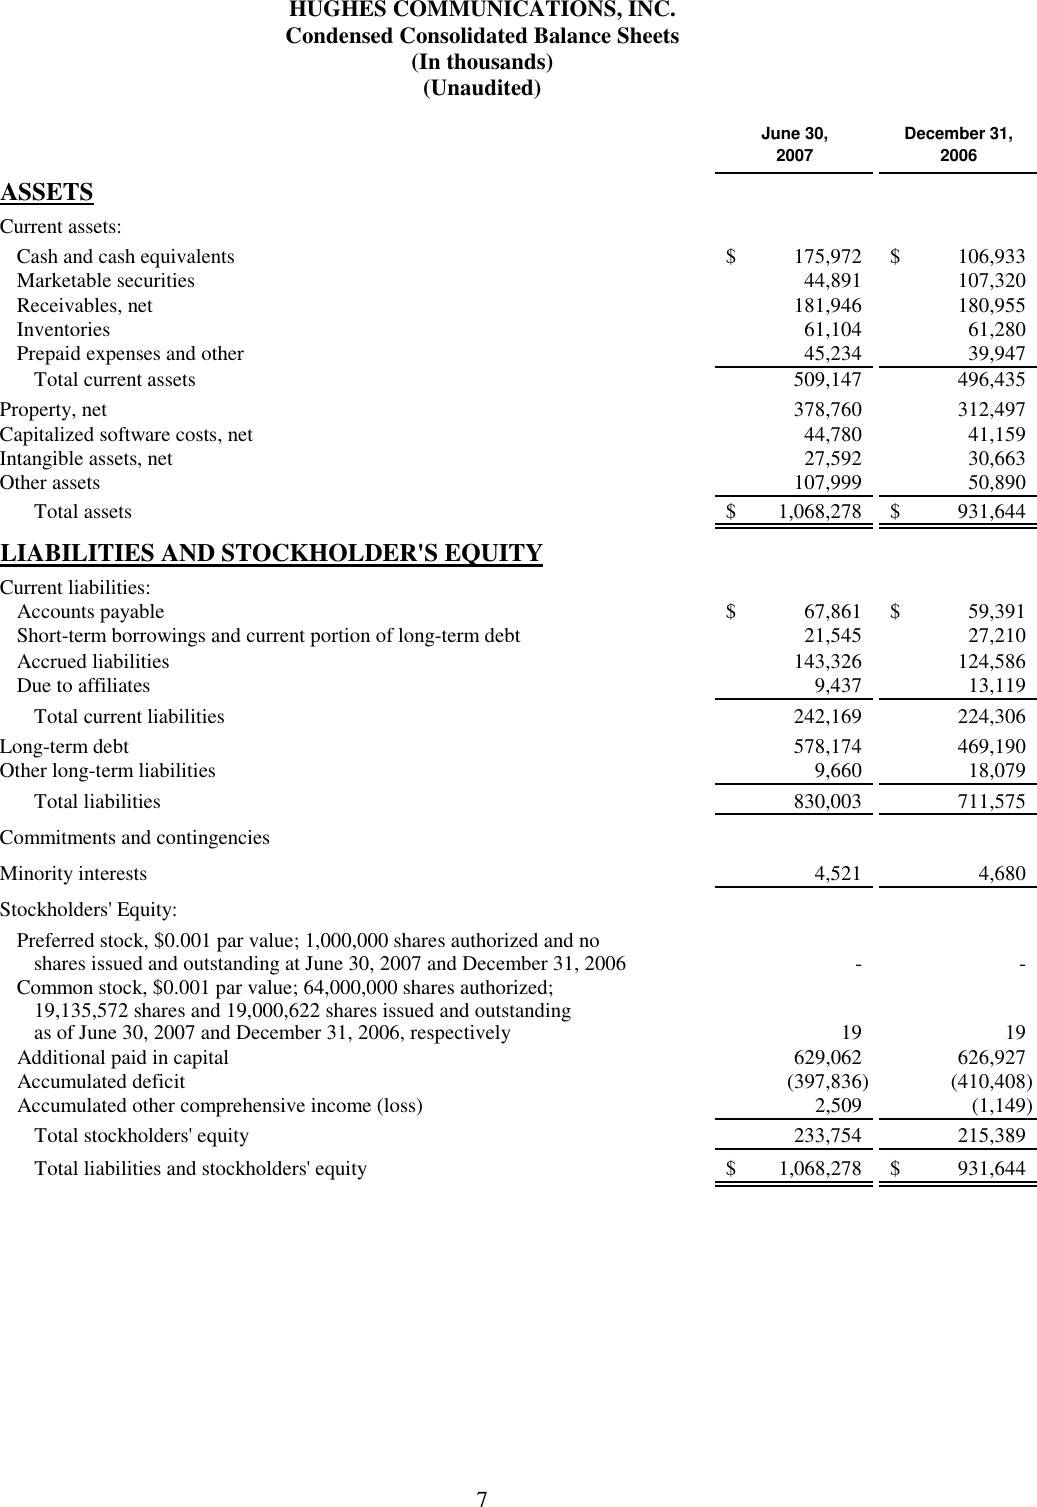 Page 7 of 12 - Q2-07 Earnings Release  08-09-07 08 09 07